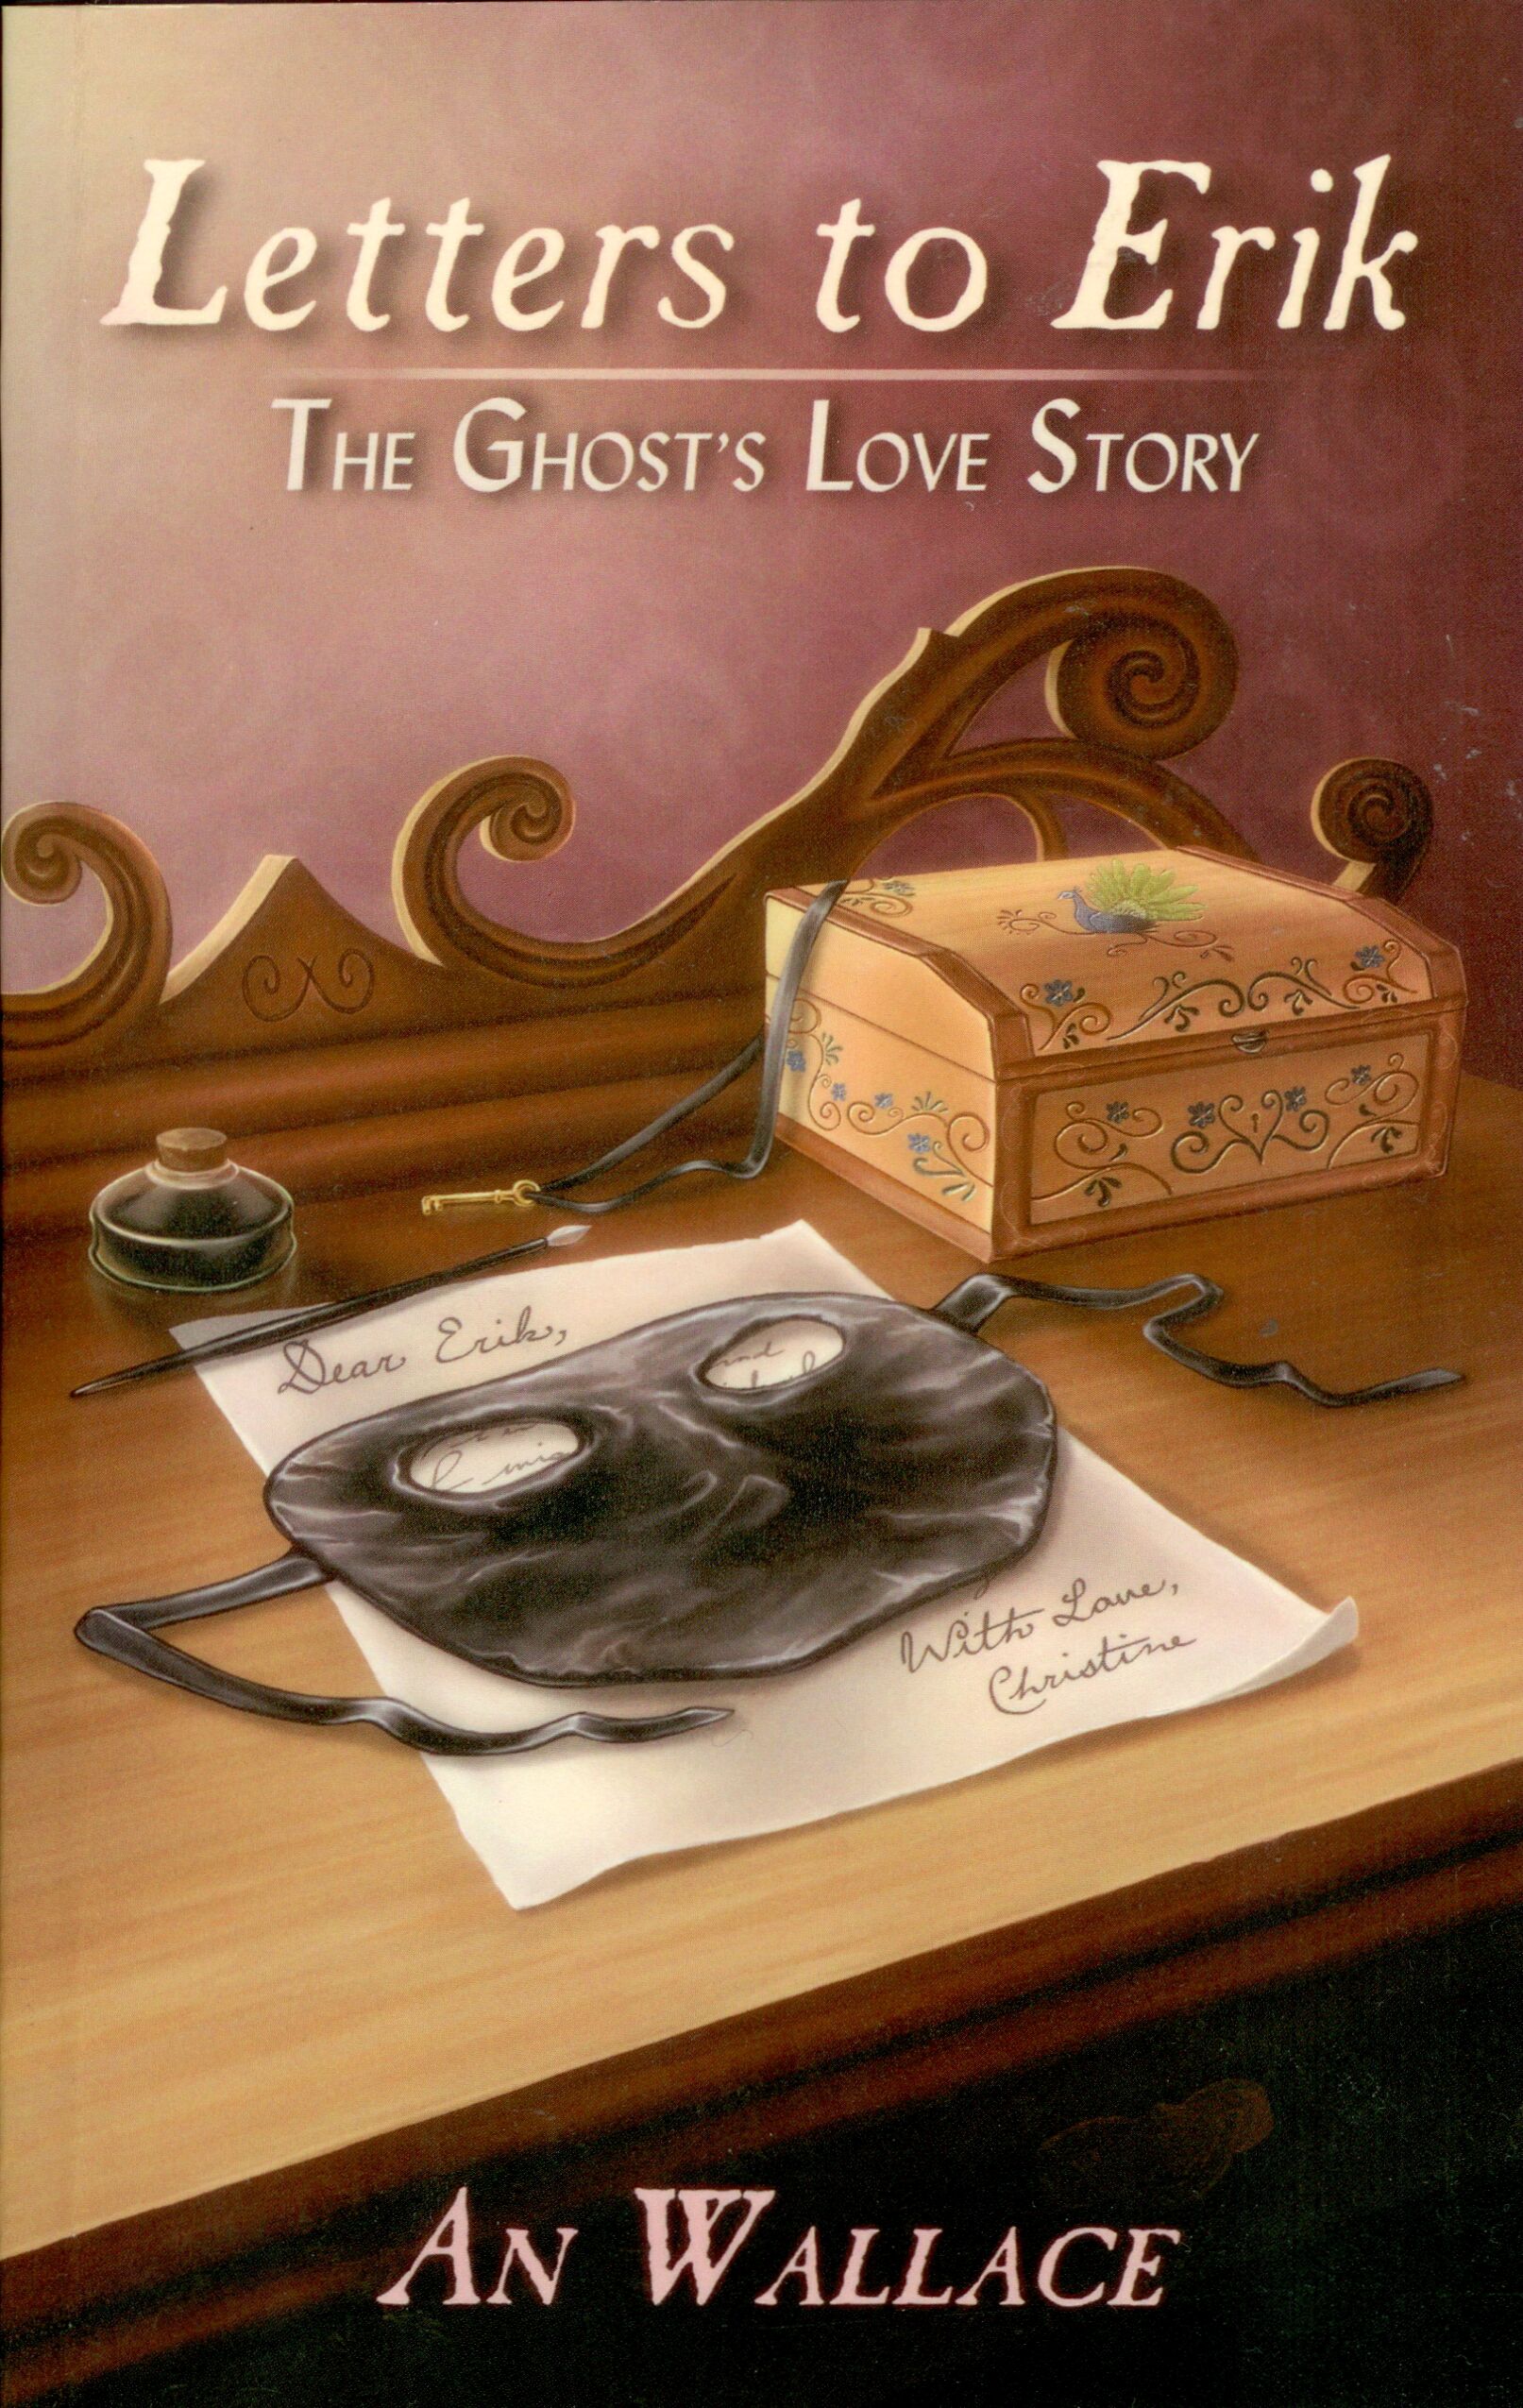 Letters to Erik: The Ghost's Love Story